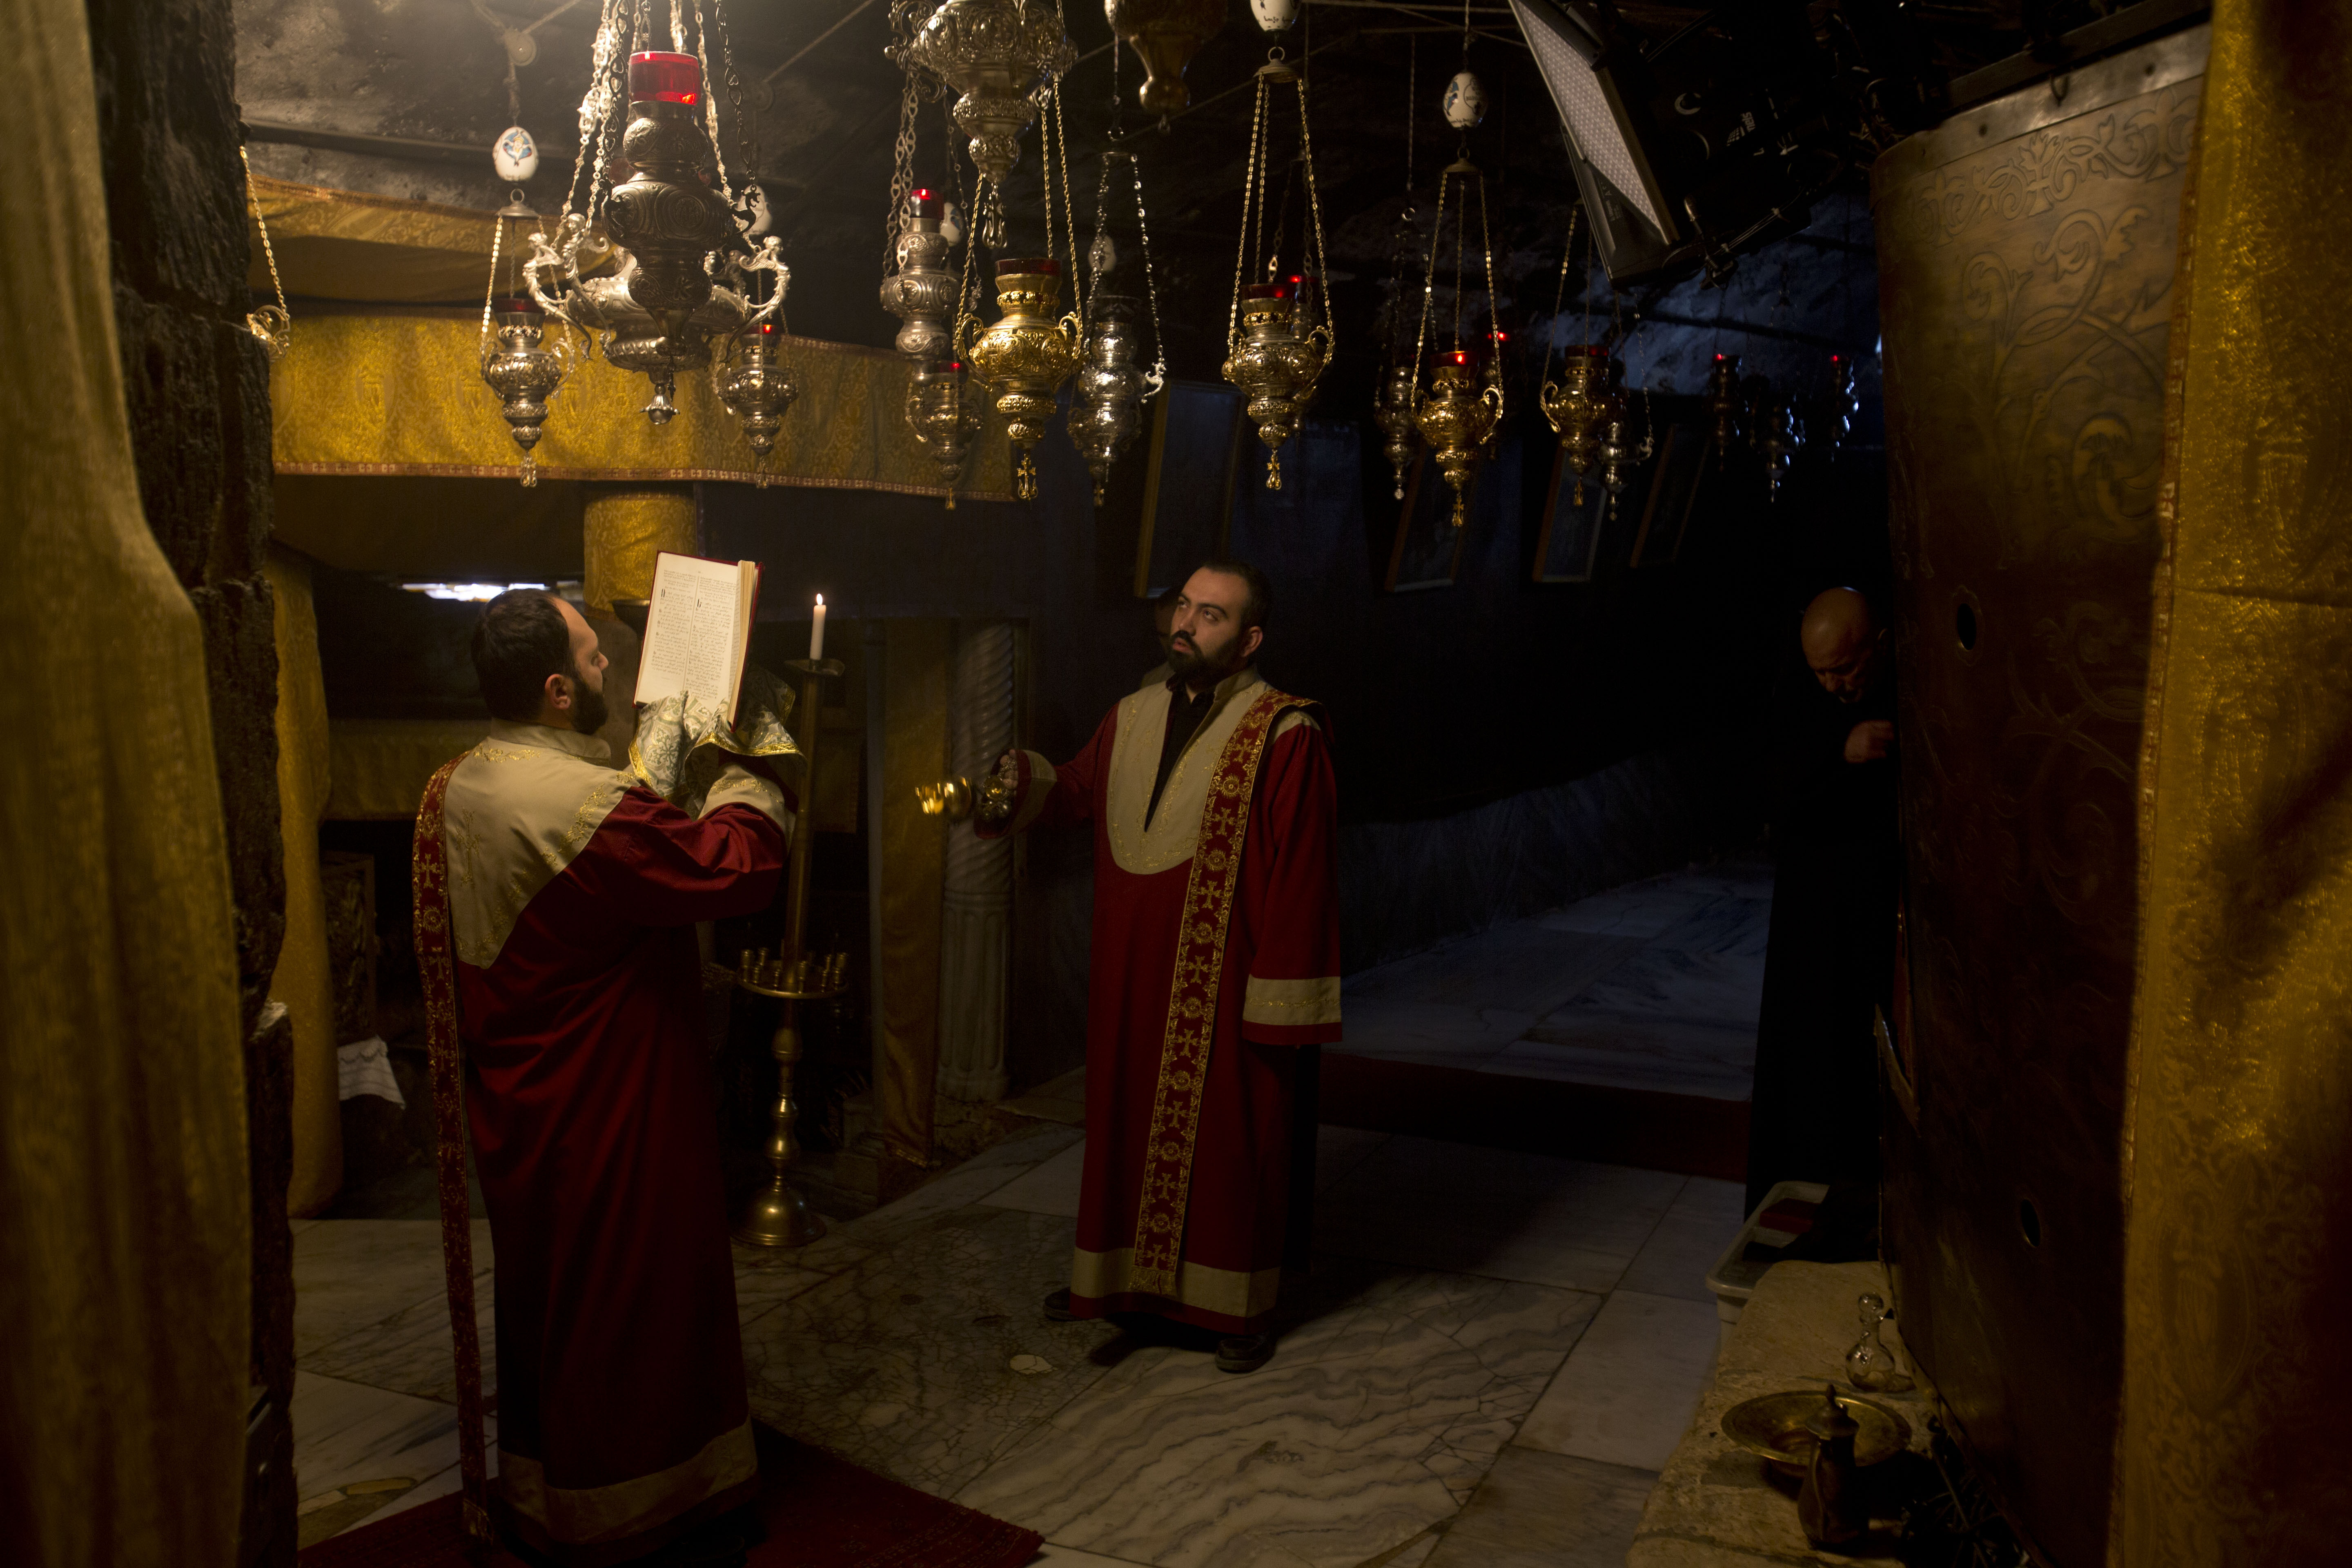 Christian Armenian pray inside the Grotto of the Church of the Nativity, traditionally believed by Christians to be the birthplace of Jesus Christ, in the West Bank city of Bethlehem on Christmas Eve, Tuesday, Dec. 24, 2019. (AP Photo/Majdi Mohammed)